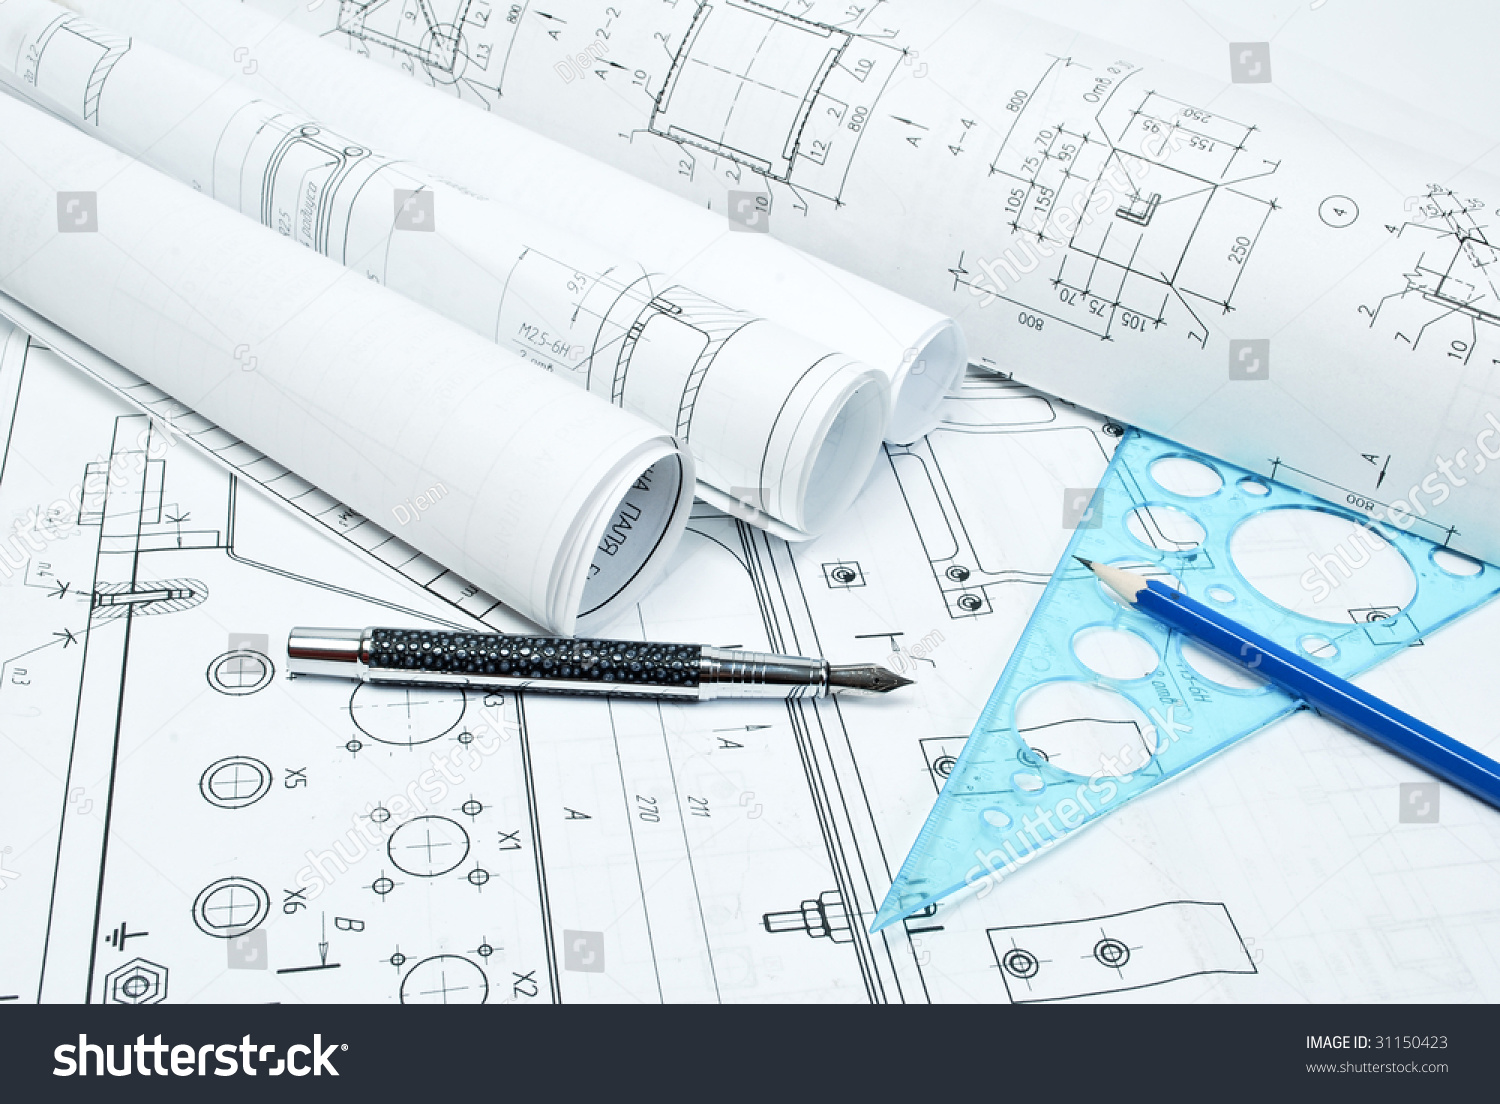 Drawing And Various Tools Stock Photo 31150423 : Shutterstock